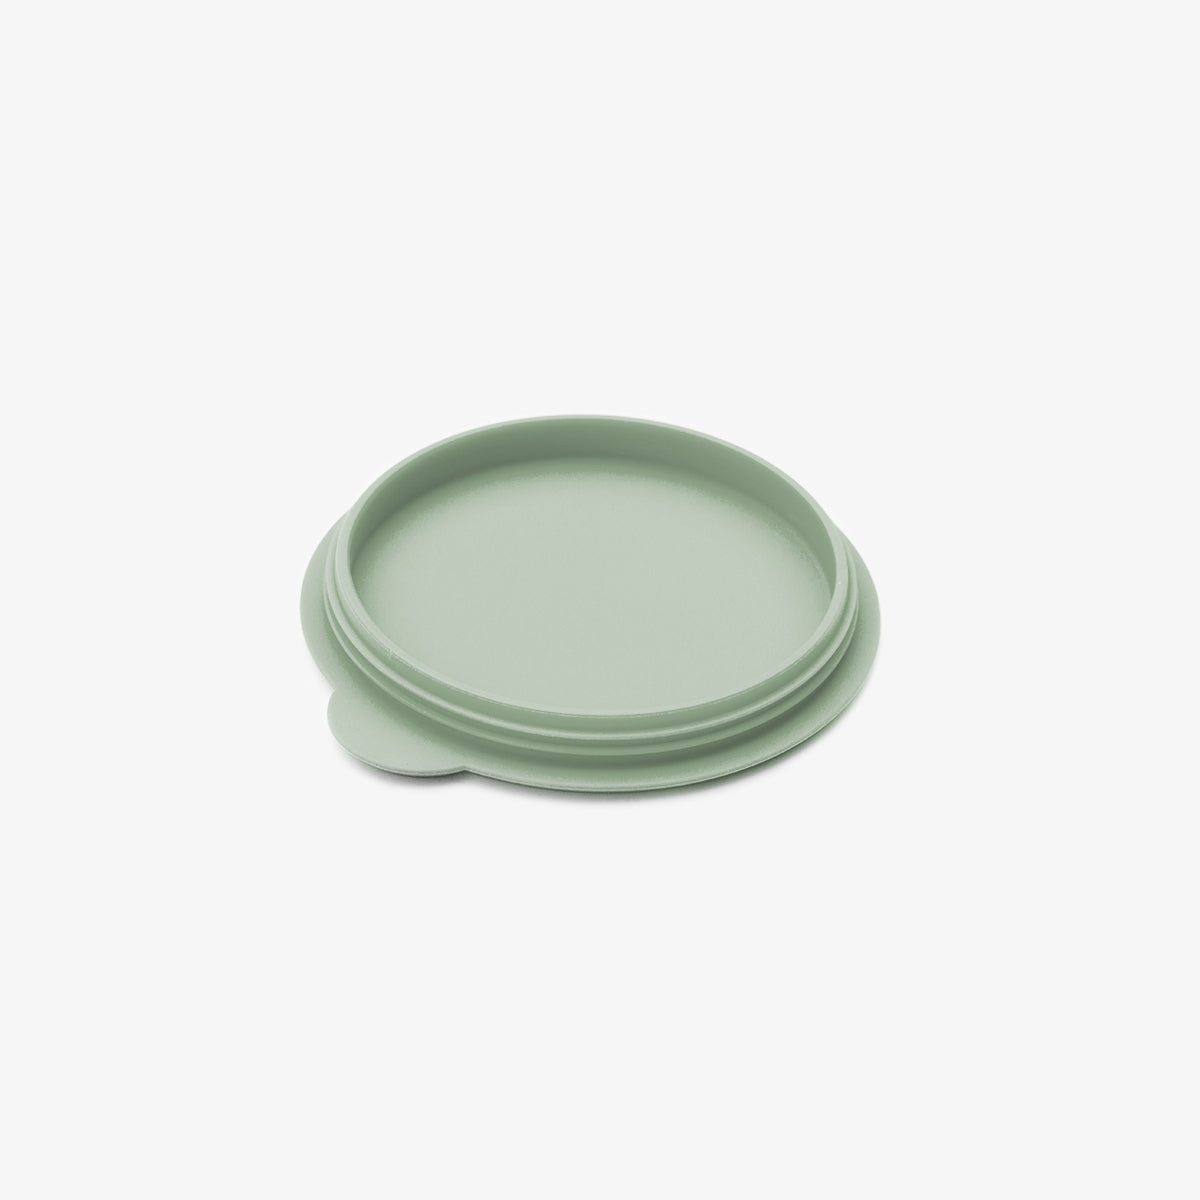 Tiny Bowl Lid in Sage / Storage Lids for the Tiny Bowl by ezpz / Silicone Lid for Baby Bowl